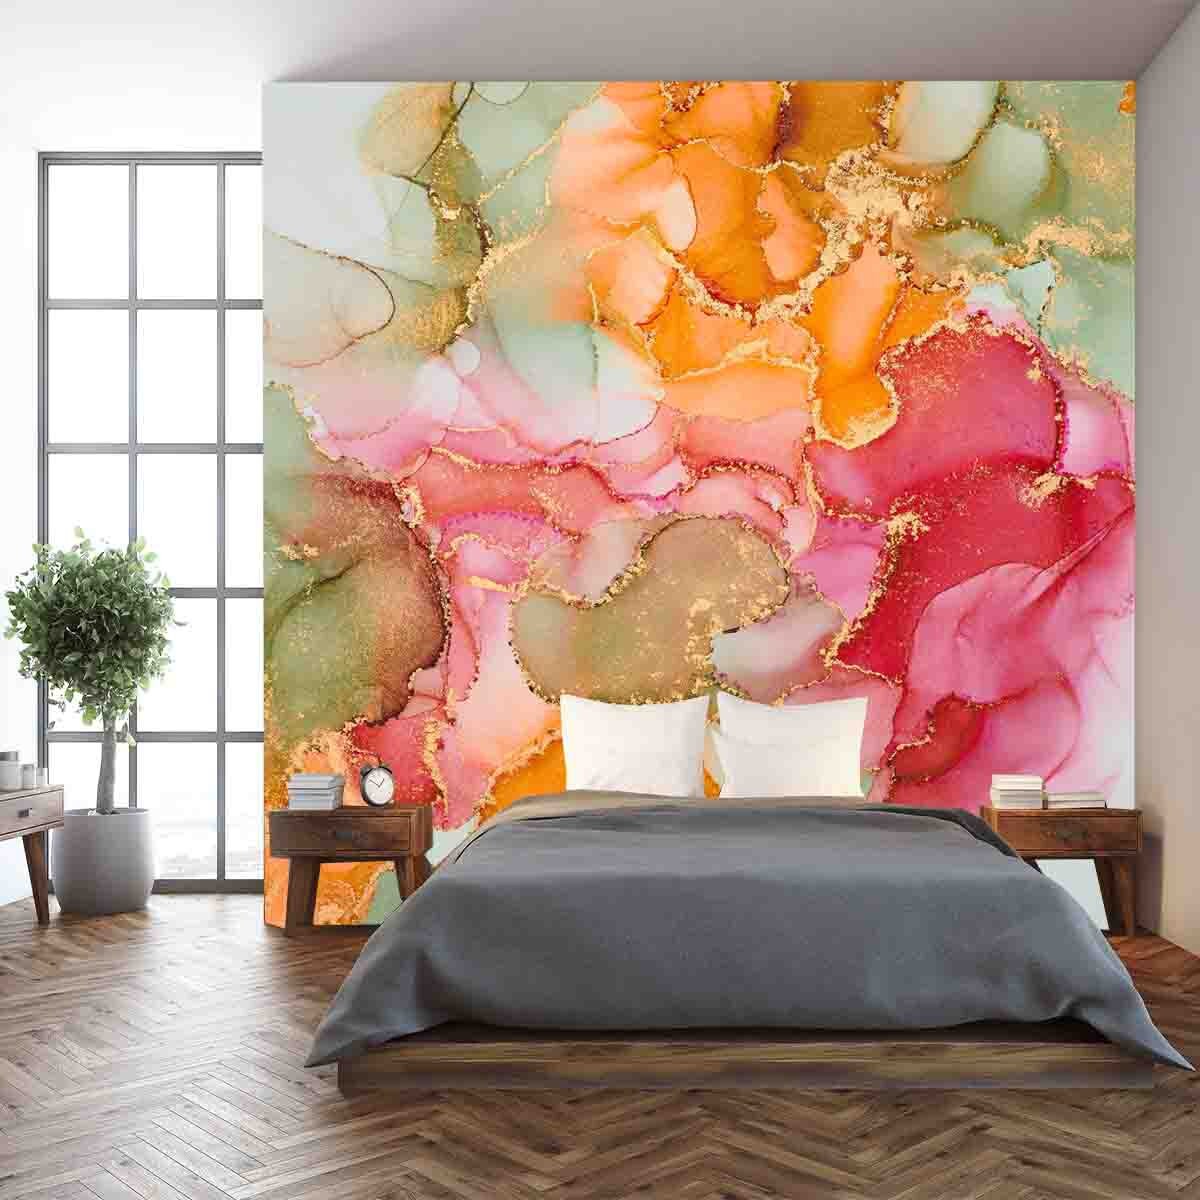 Natural Luxury Abstract Fluid Art Painting with Bright Colors Wallpaper Bedroom Mural